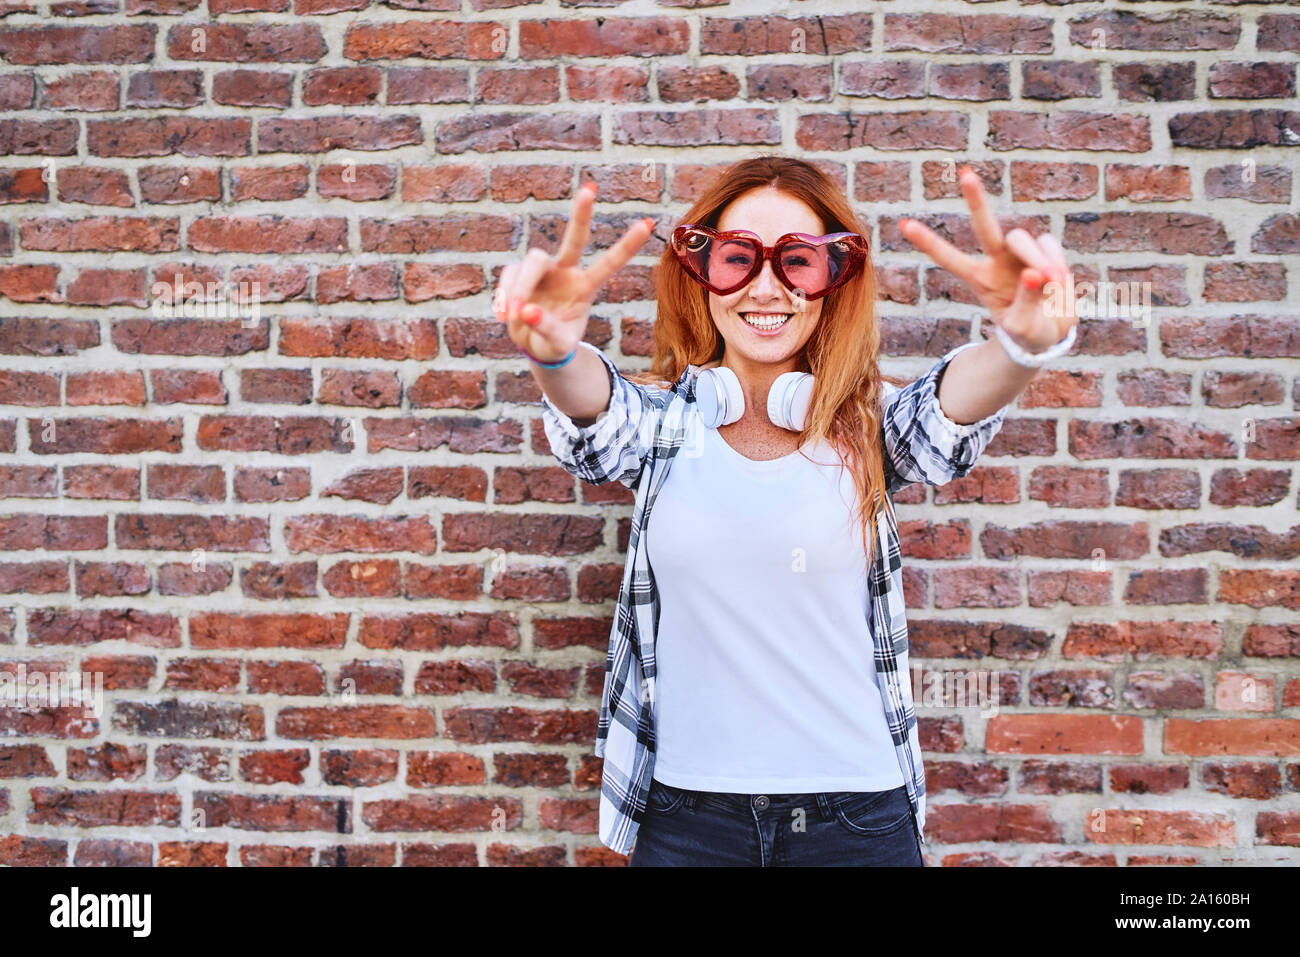 Cheerful young woman in heart-shaped glasses faisant la paix et gestes smiling at camera Banque D'Images